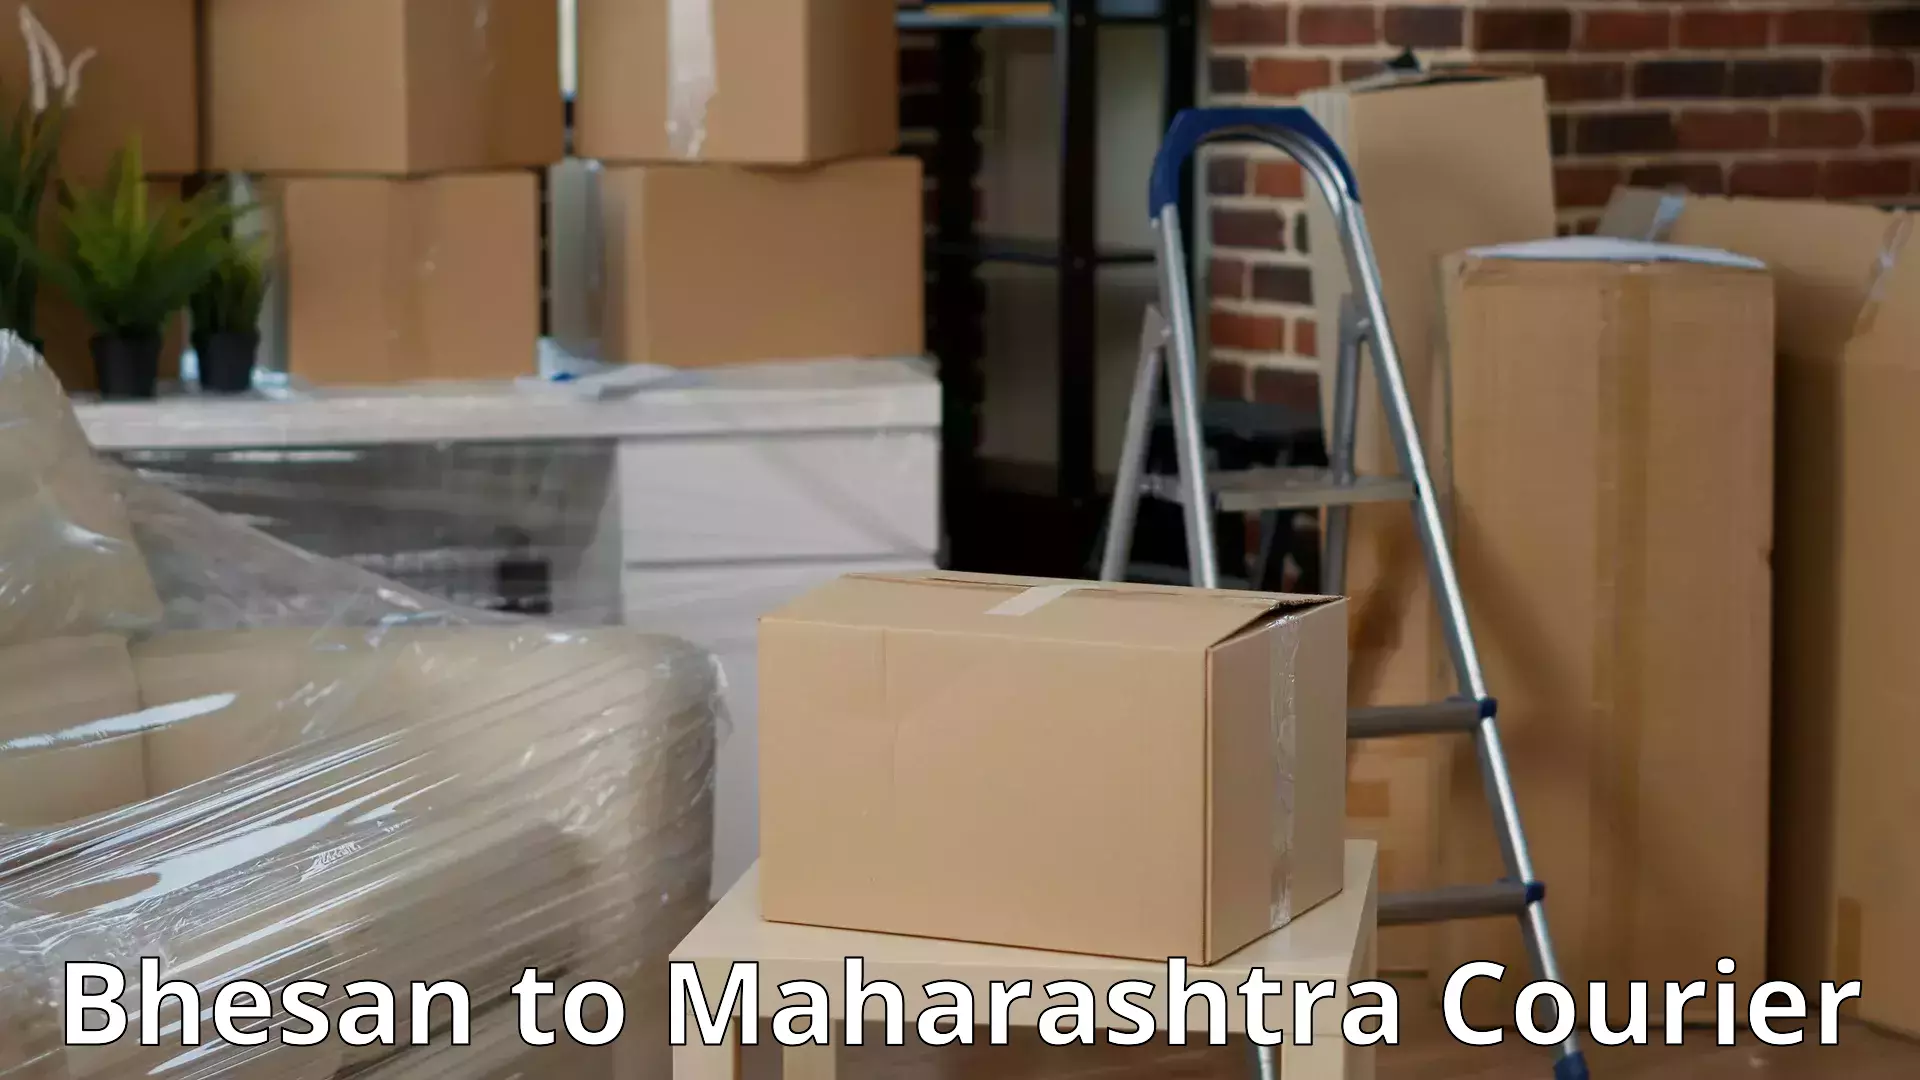 Quality relocation assistance Bhesan to Mahabaleshwar